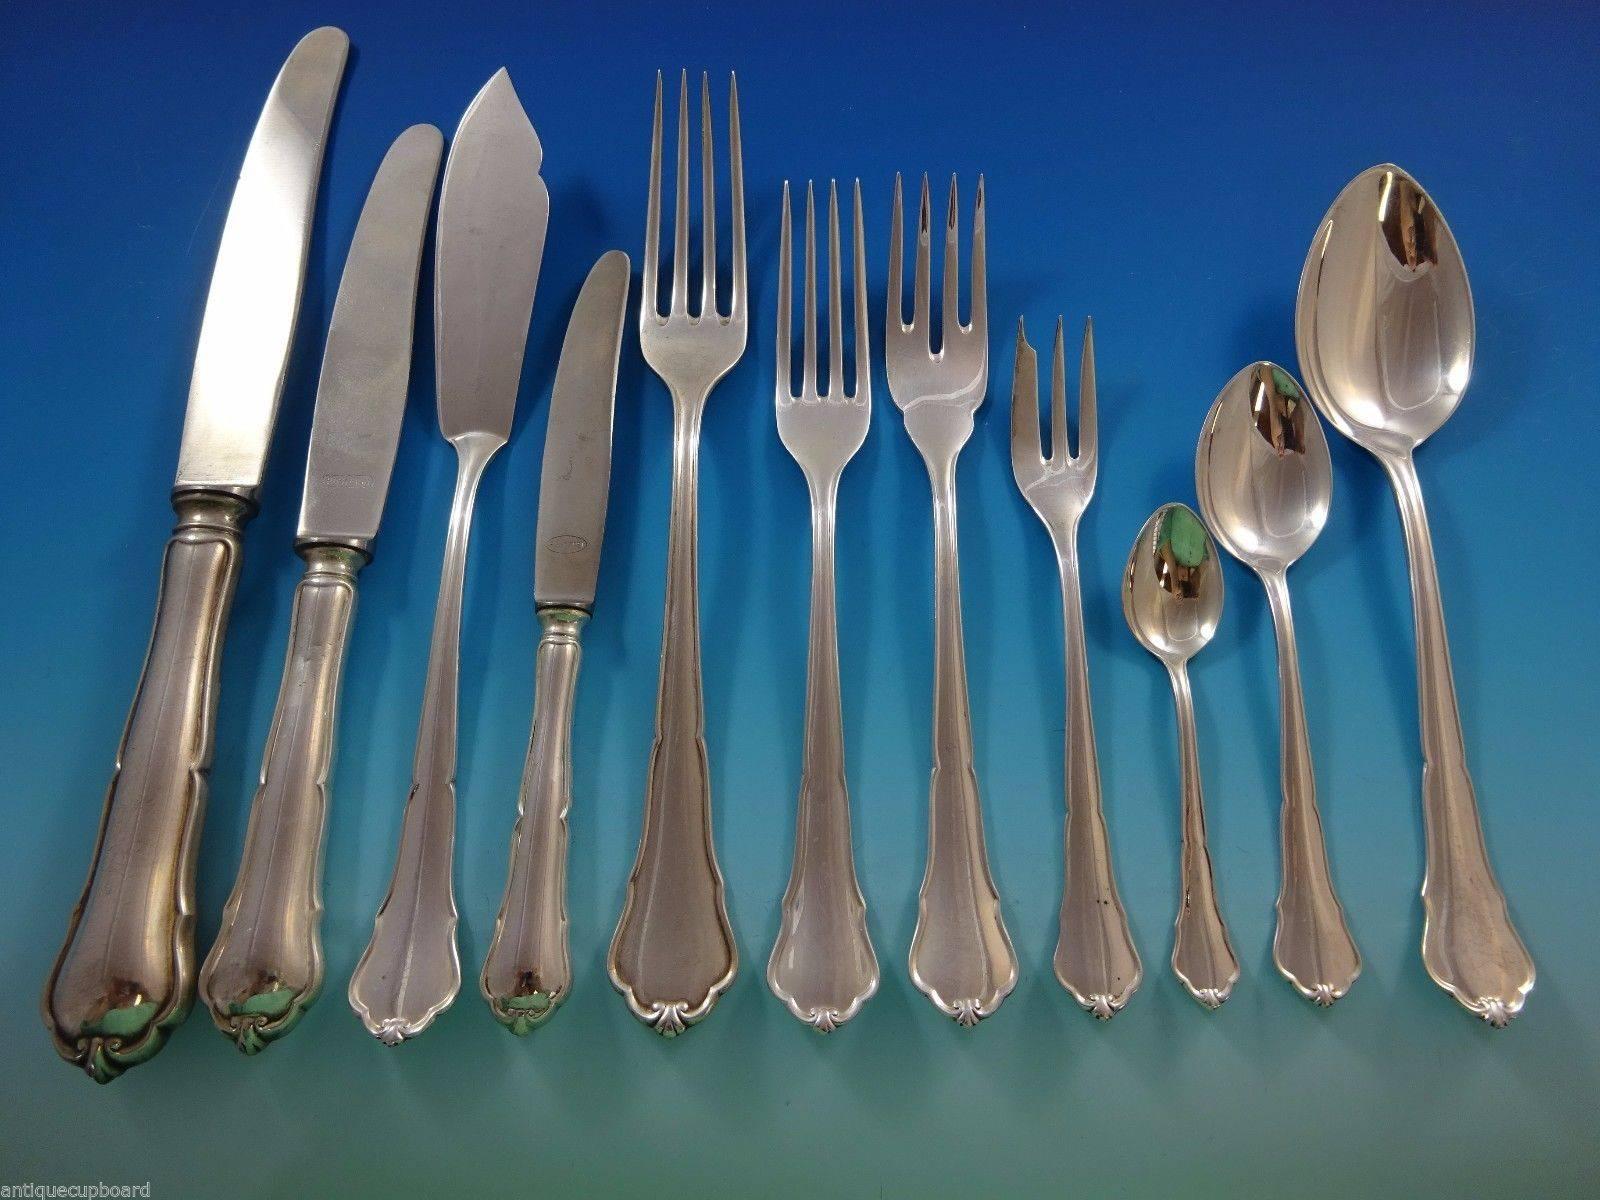 Chippendale by H B Hammer German 800 silver flatware set of 140 pieces. This set includes:

12 dinner size knives, 10